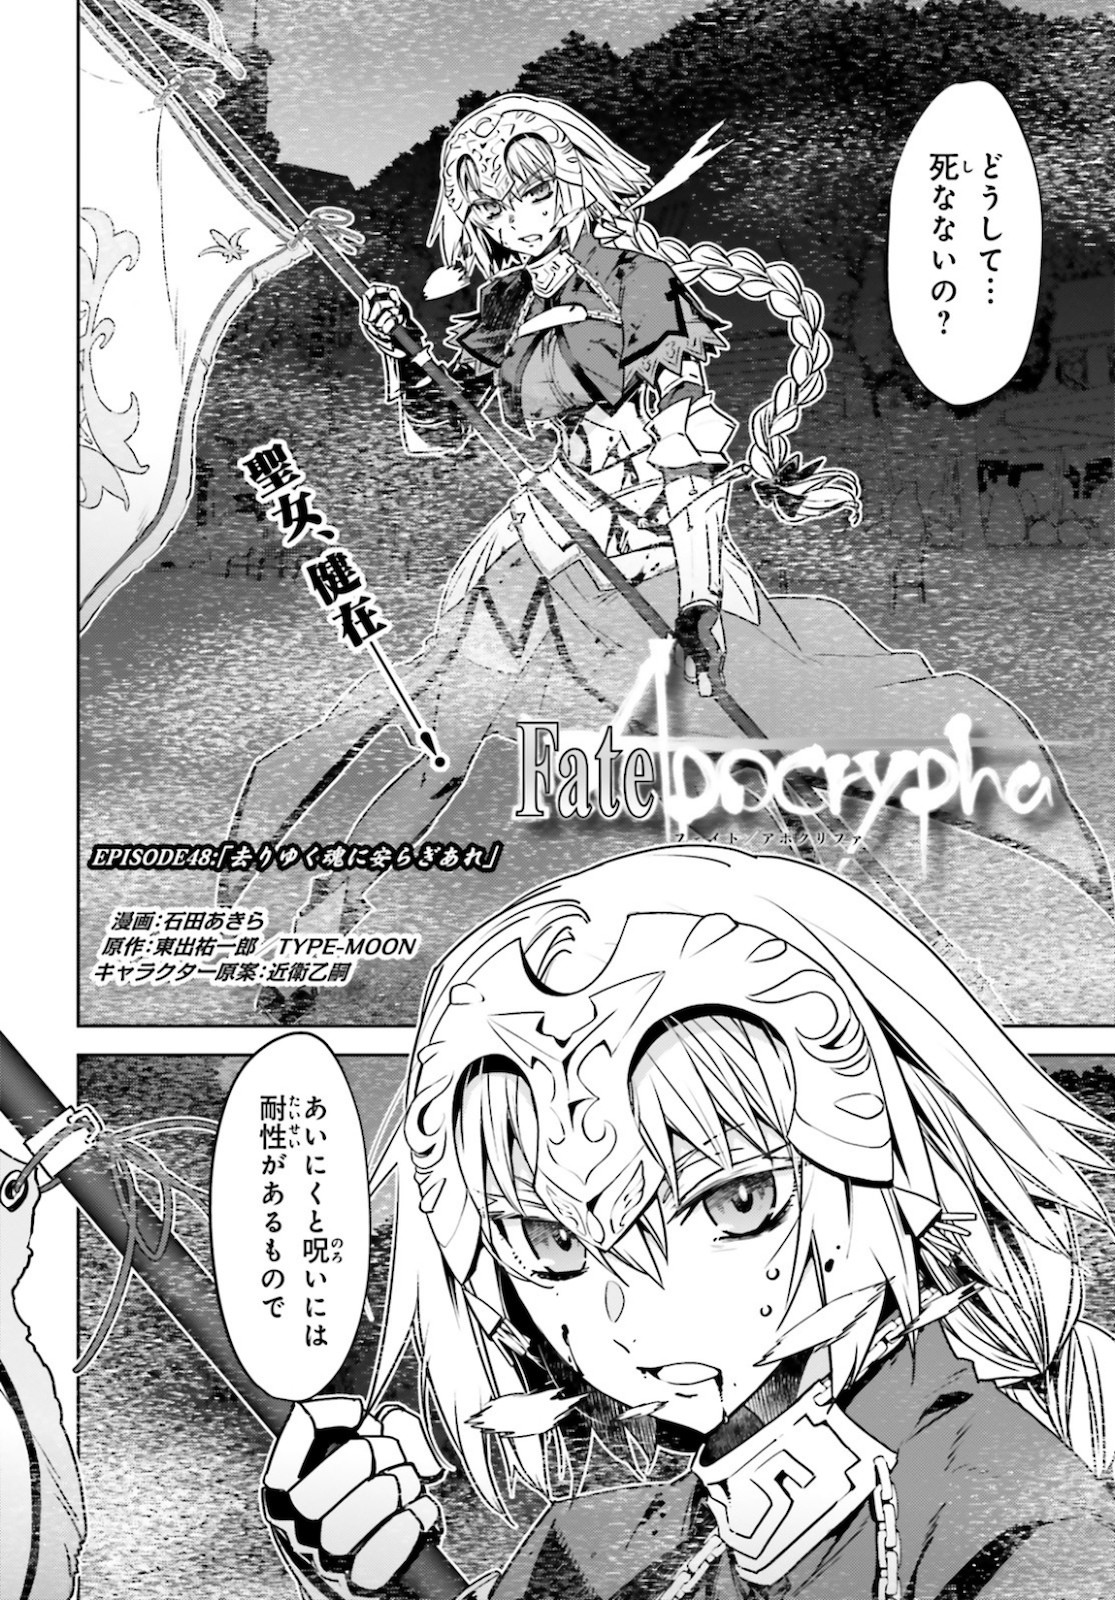 Fate-Apocrypha - Chapter 48 - Page 1